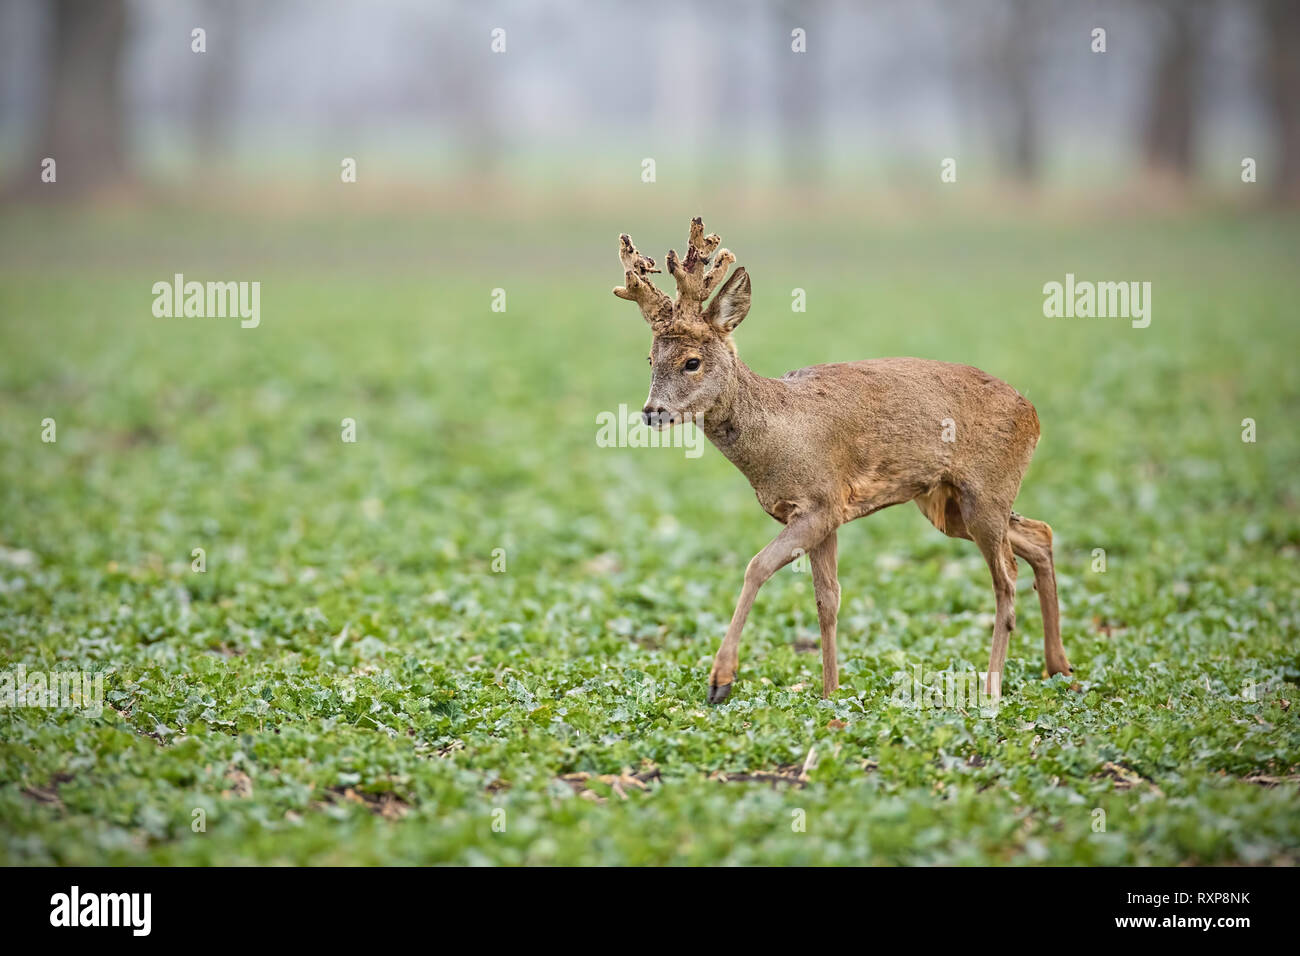 Roe deer buck with big antlers covered in velvet walking on a field with copy space. Stock Photo